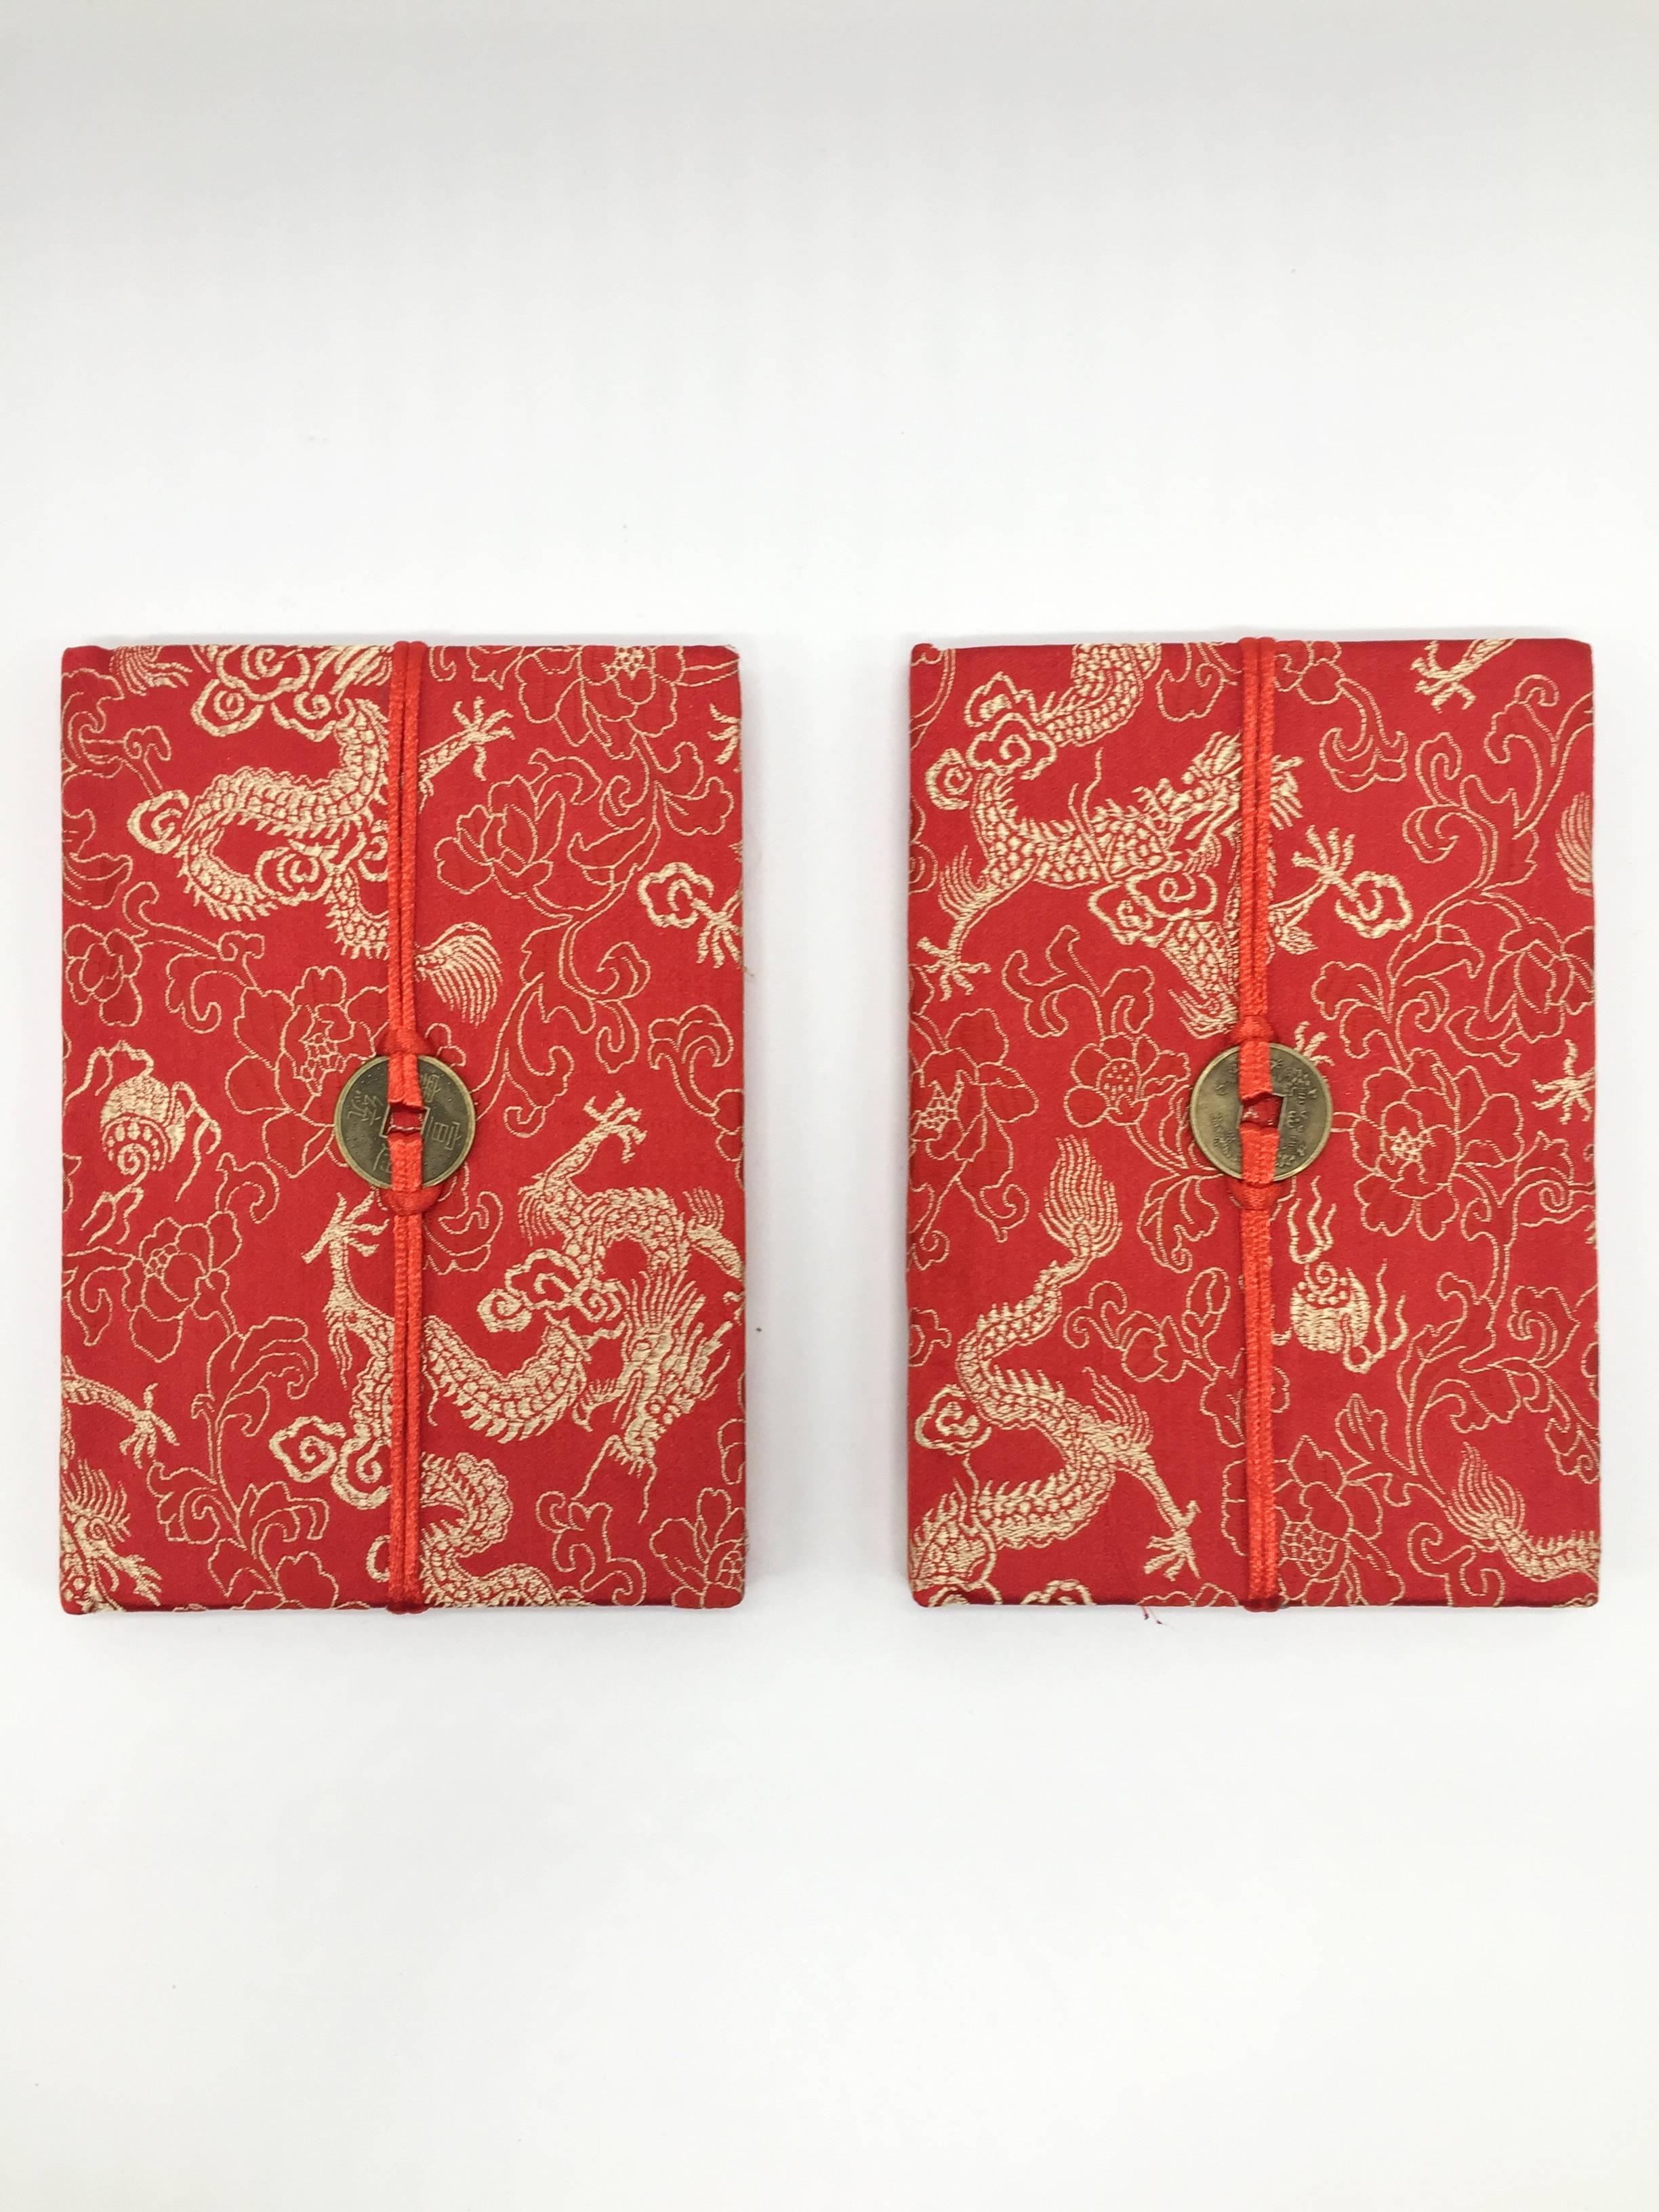 These journals are covered in pure silk brocade. The fabrics showcase a myriad of traditional, auspicious Chinese symbols, each expressing good wishes for life including good health, long life, happiness, prosperity, love and harmony. Nice brass